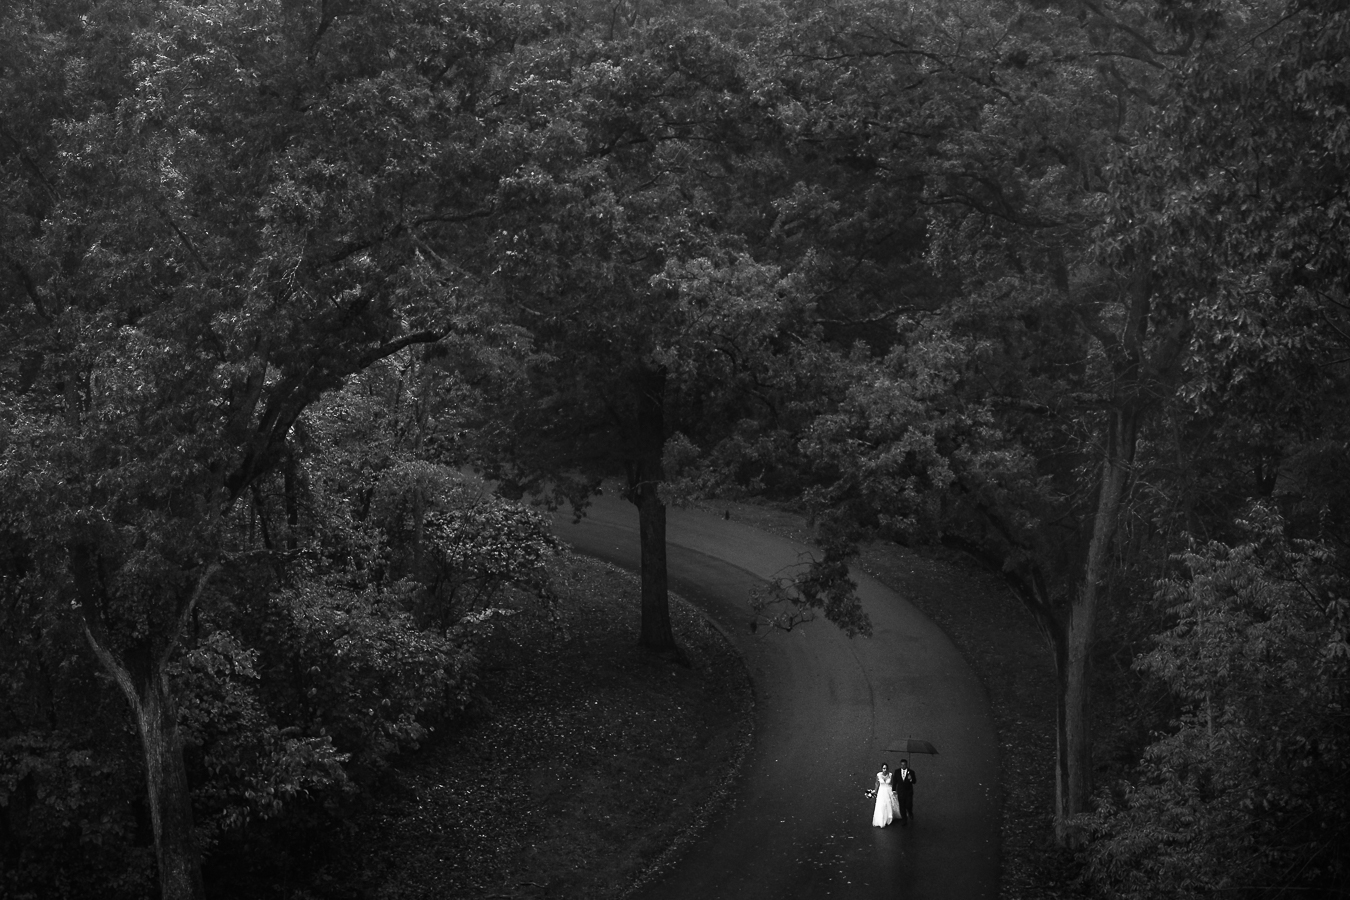 Gettysburg Wedding Photographer, lisa rhinehart, captures this black and white aerial image from ontop of culps hill of the bride and groom as they walk down the pathway between the trees at the Gettysburg battlefields in pa during their rainy day wedding first look